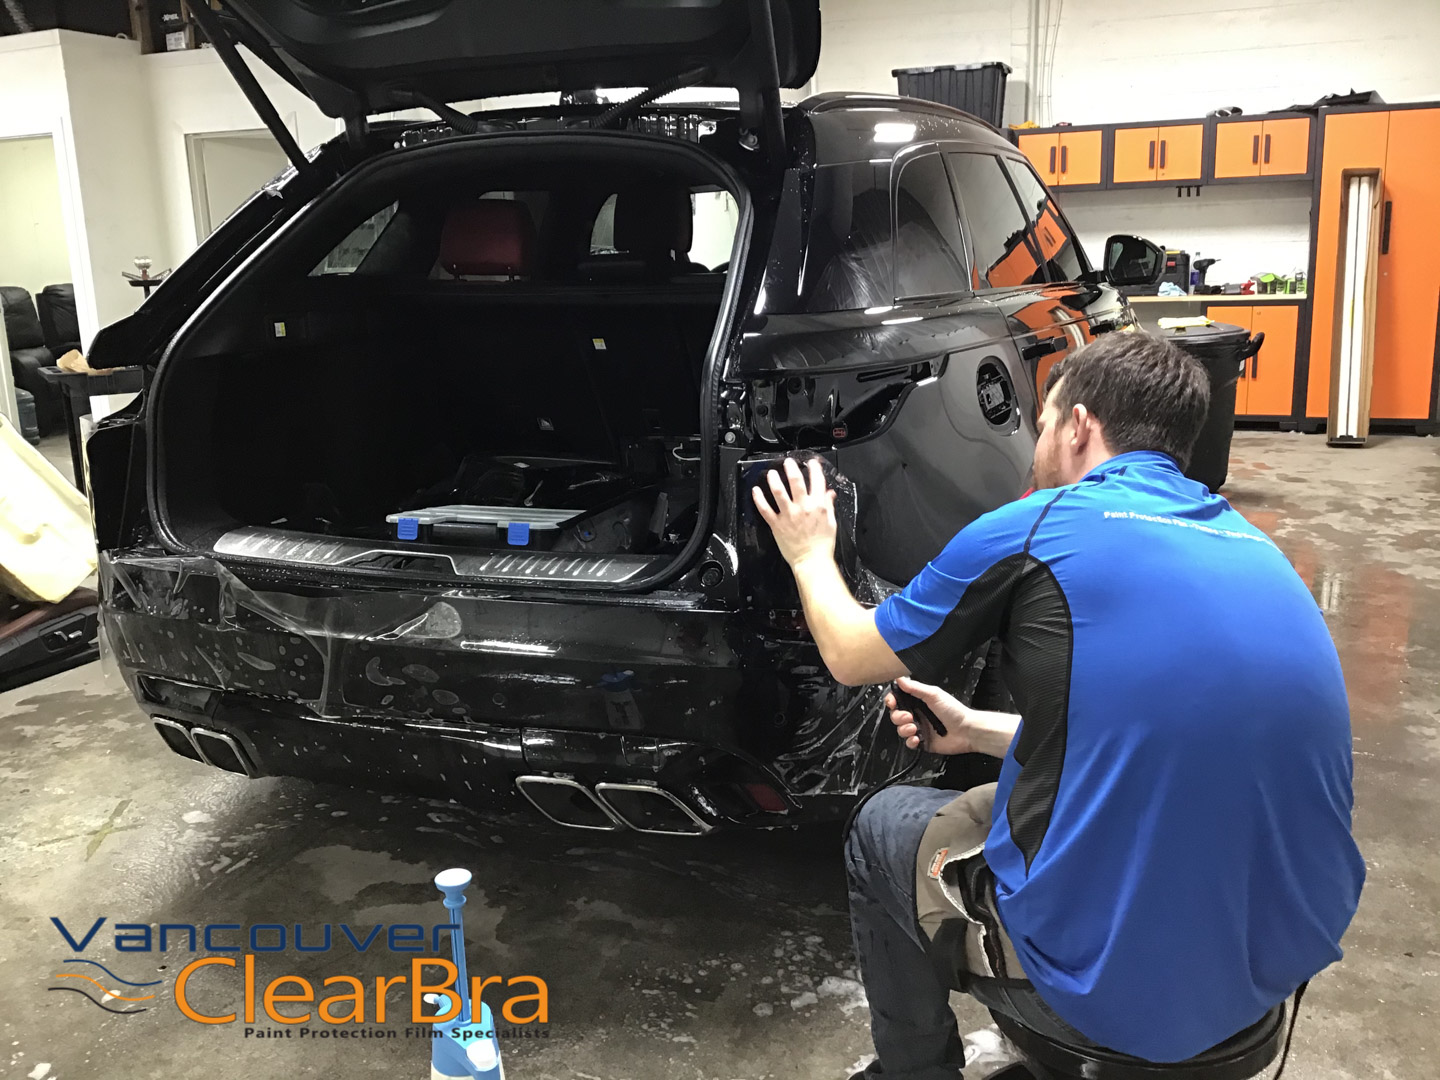 https://blog.vancouverclearbra.com/wp-content/uploads/2021/02/velar-range-rover-xpel-ultimate-clear-bra-paint-protection-film-Vancouver-ClearBra-9.jpg